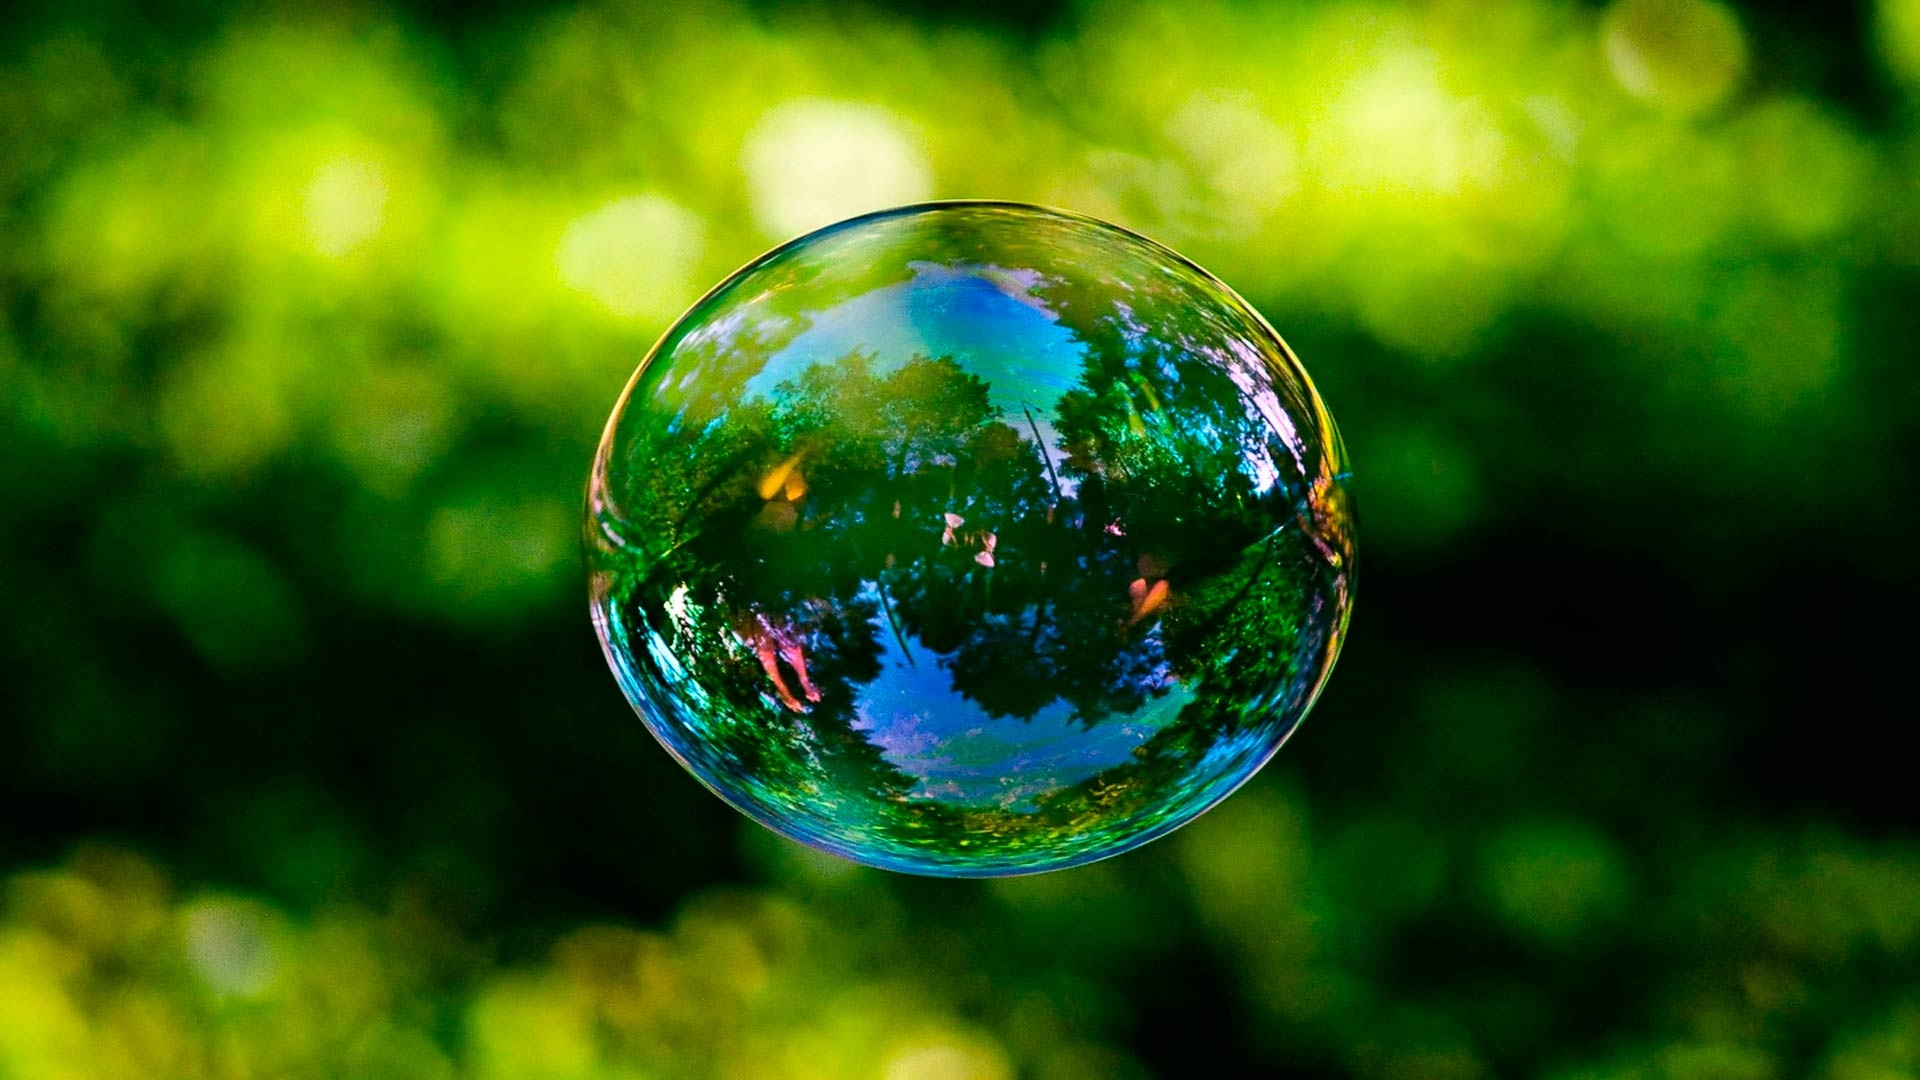 spring, frame, instant, soap, bubble, bright